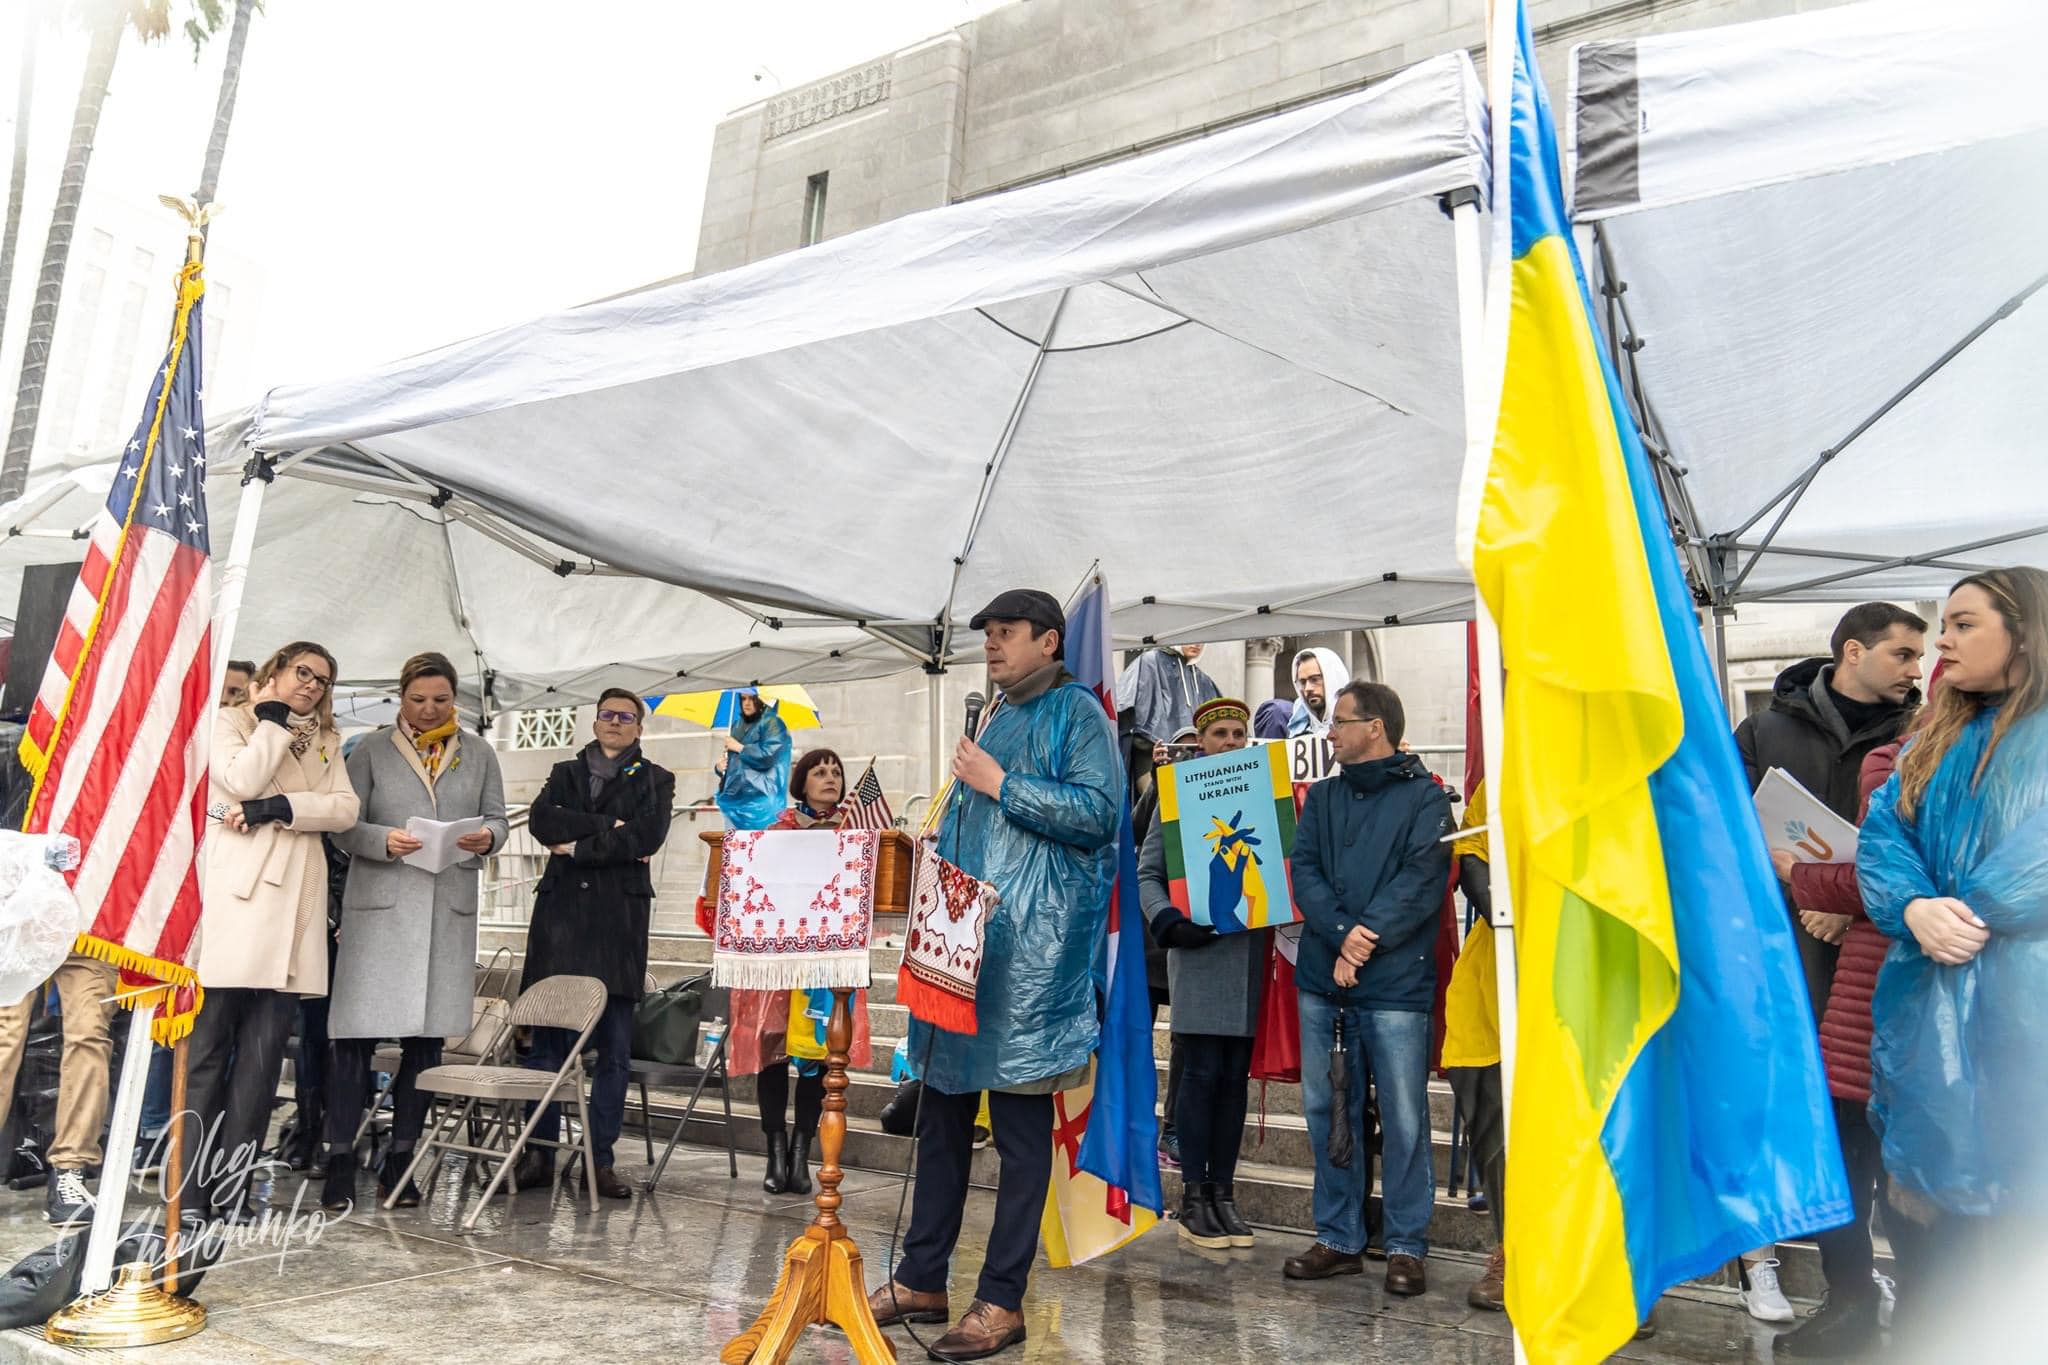 Georgian Cultural and Educational Center of Southern California stands with Ukraine